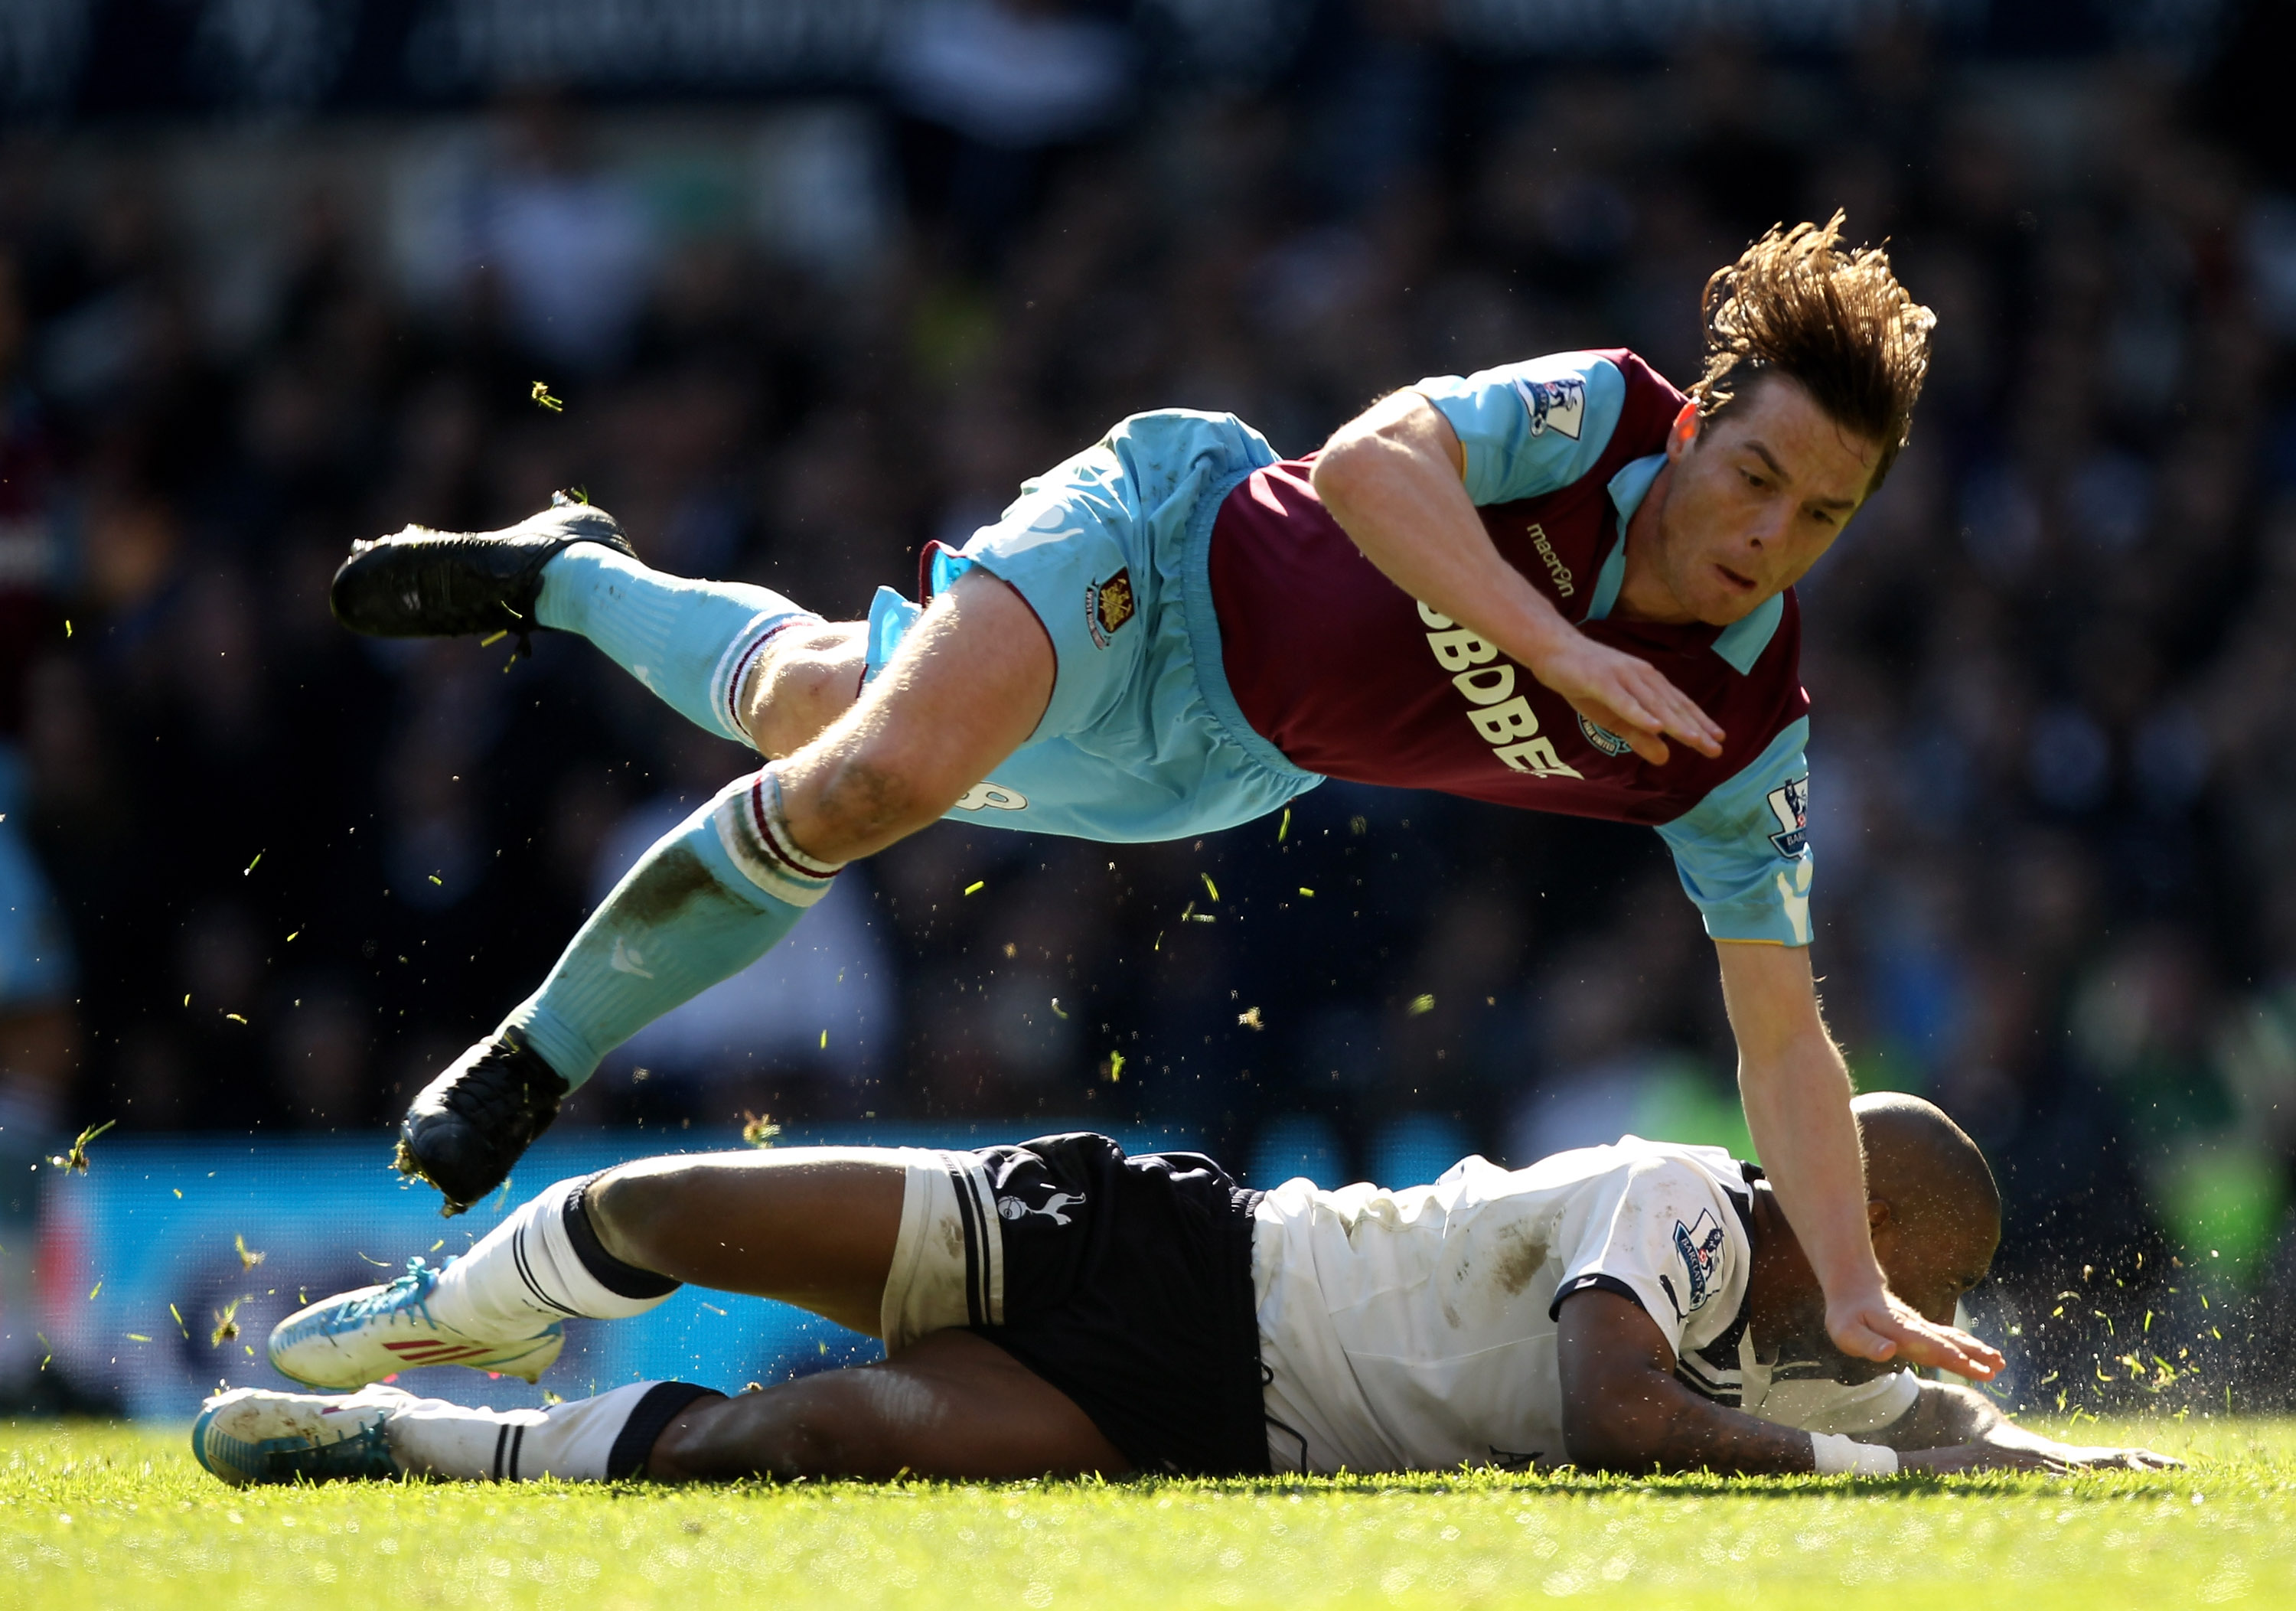 LONDON, ENGLAND - MARCH 19:  Scott Parker (up) of West Ham tangles with Jermain Defoe of Tottenham during the Barclays Premier League match between Tottenham Hotspur and West Ham United at White Hart Lane on March 19, 2011 in London, England.  (Photo by I